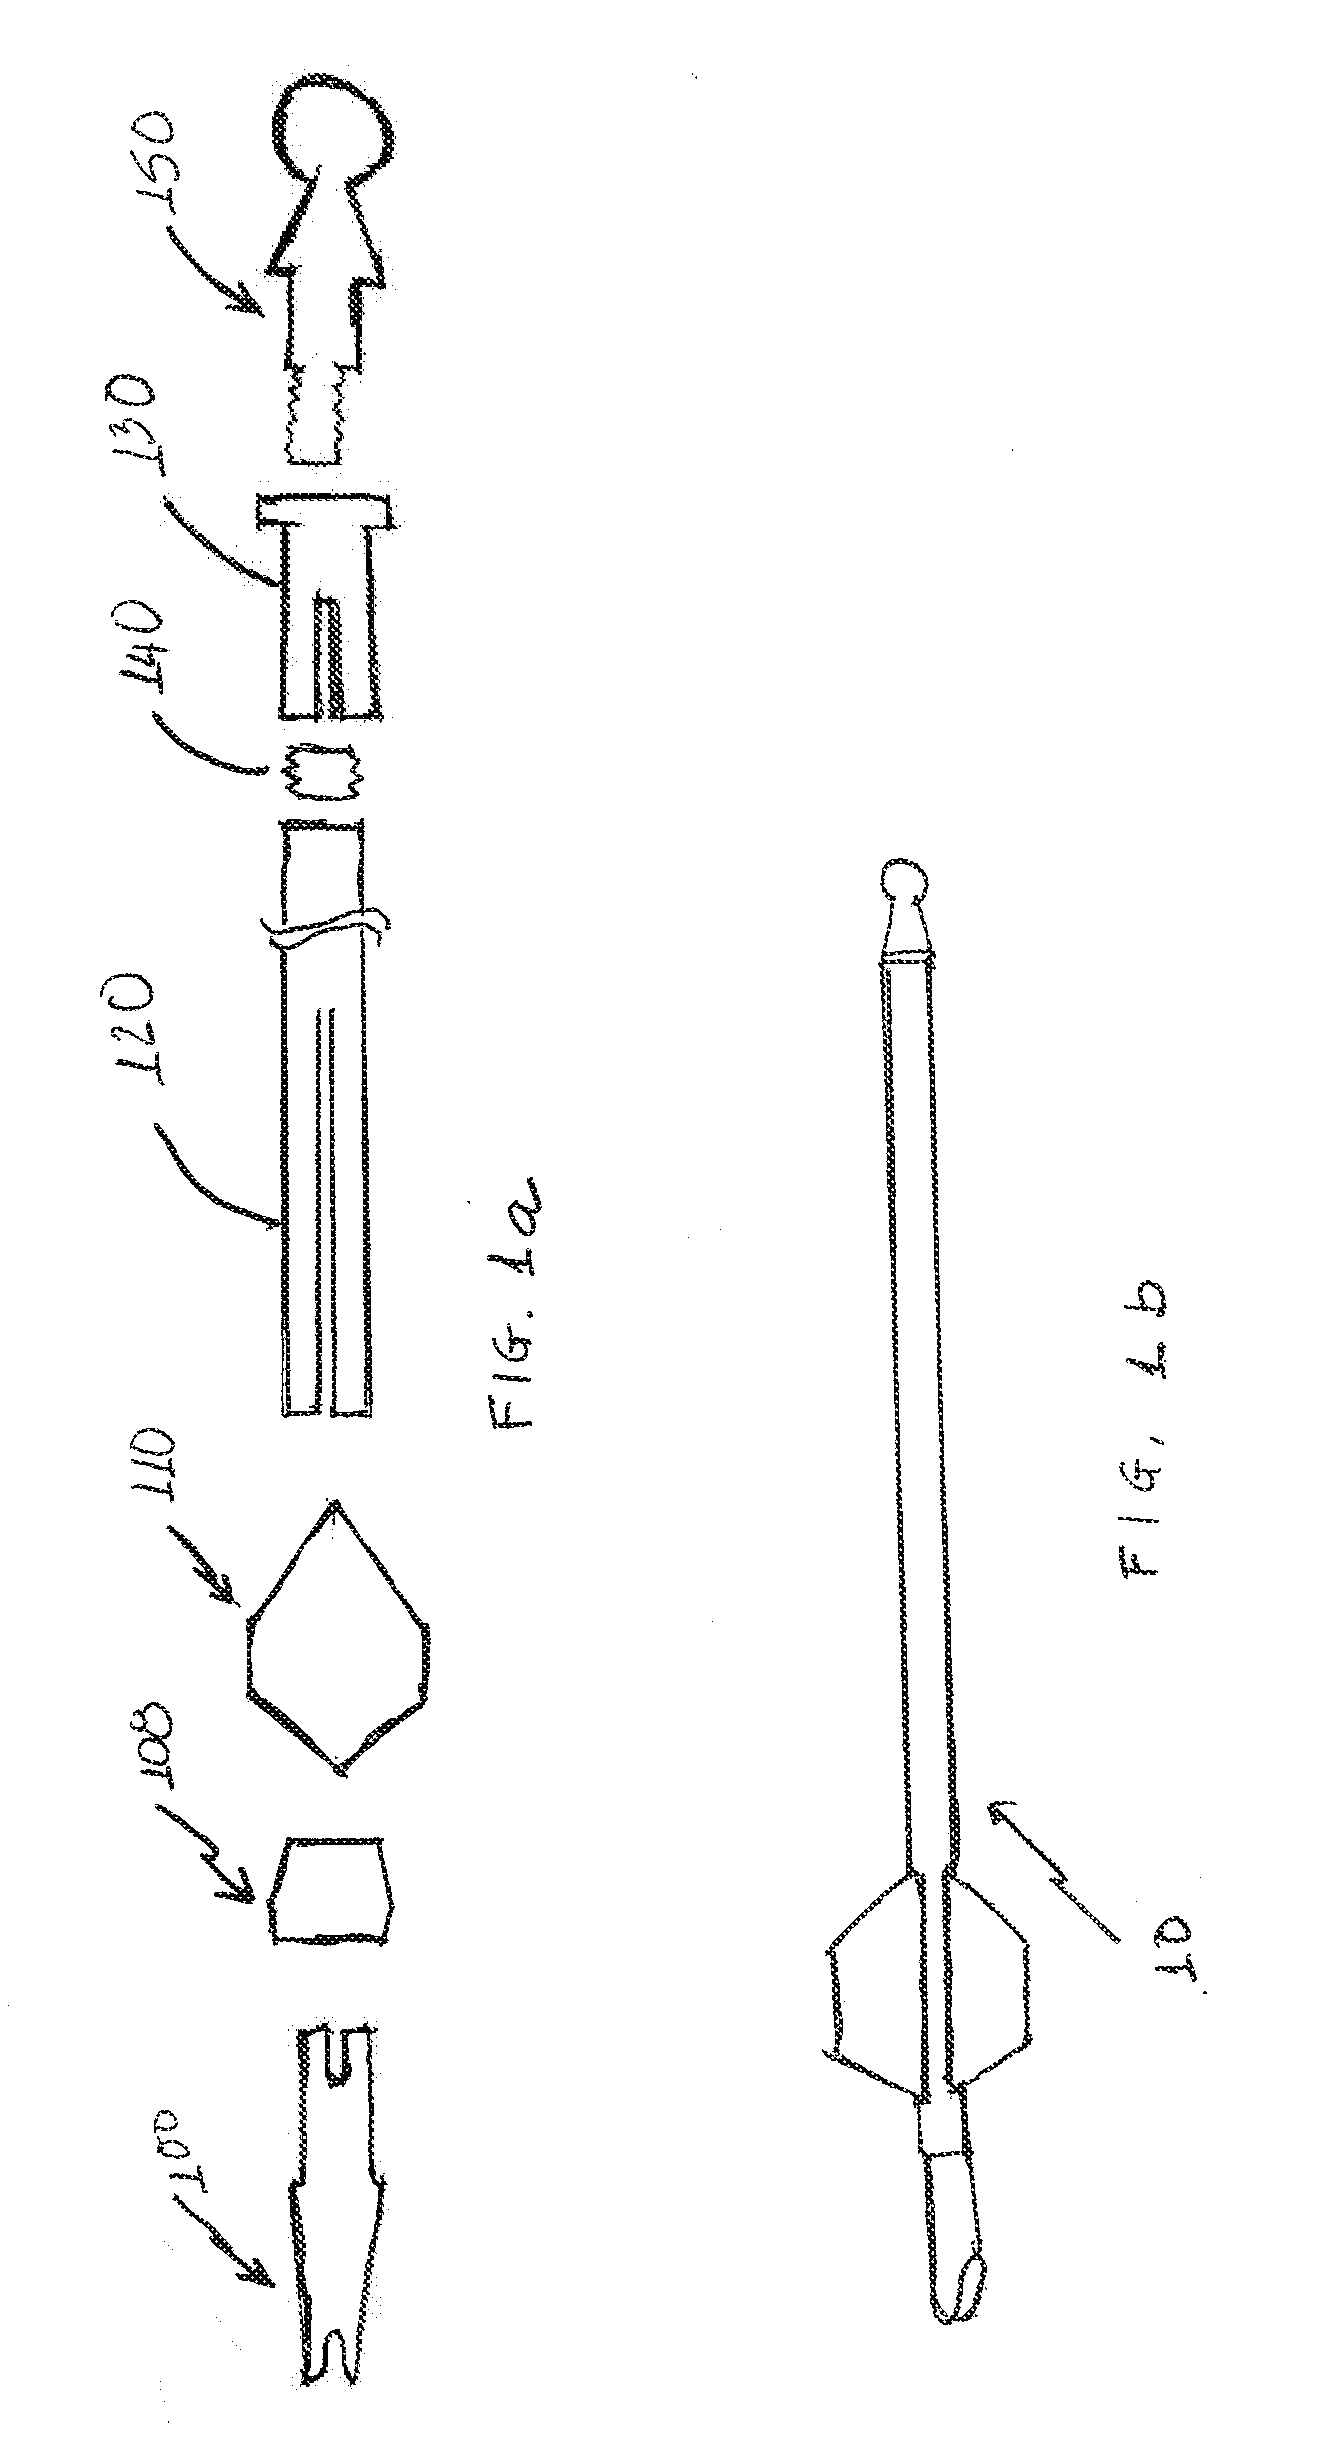 Arrow having an insert head assembly and fletching design